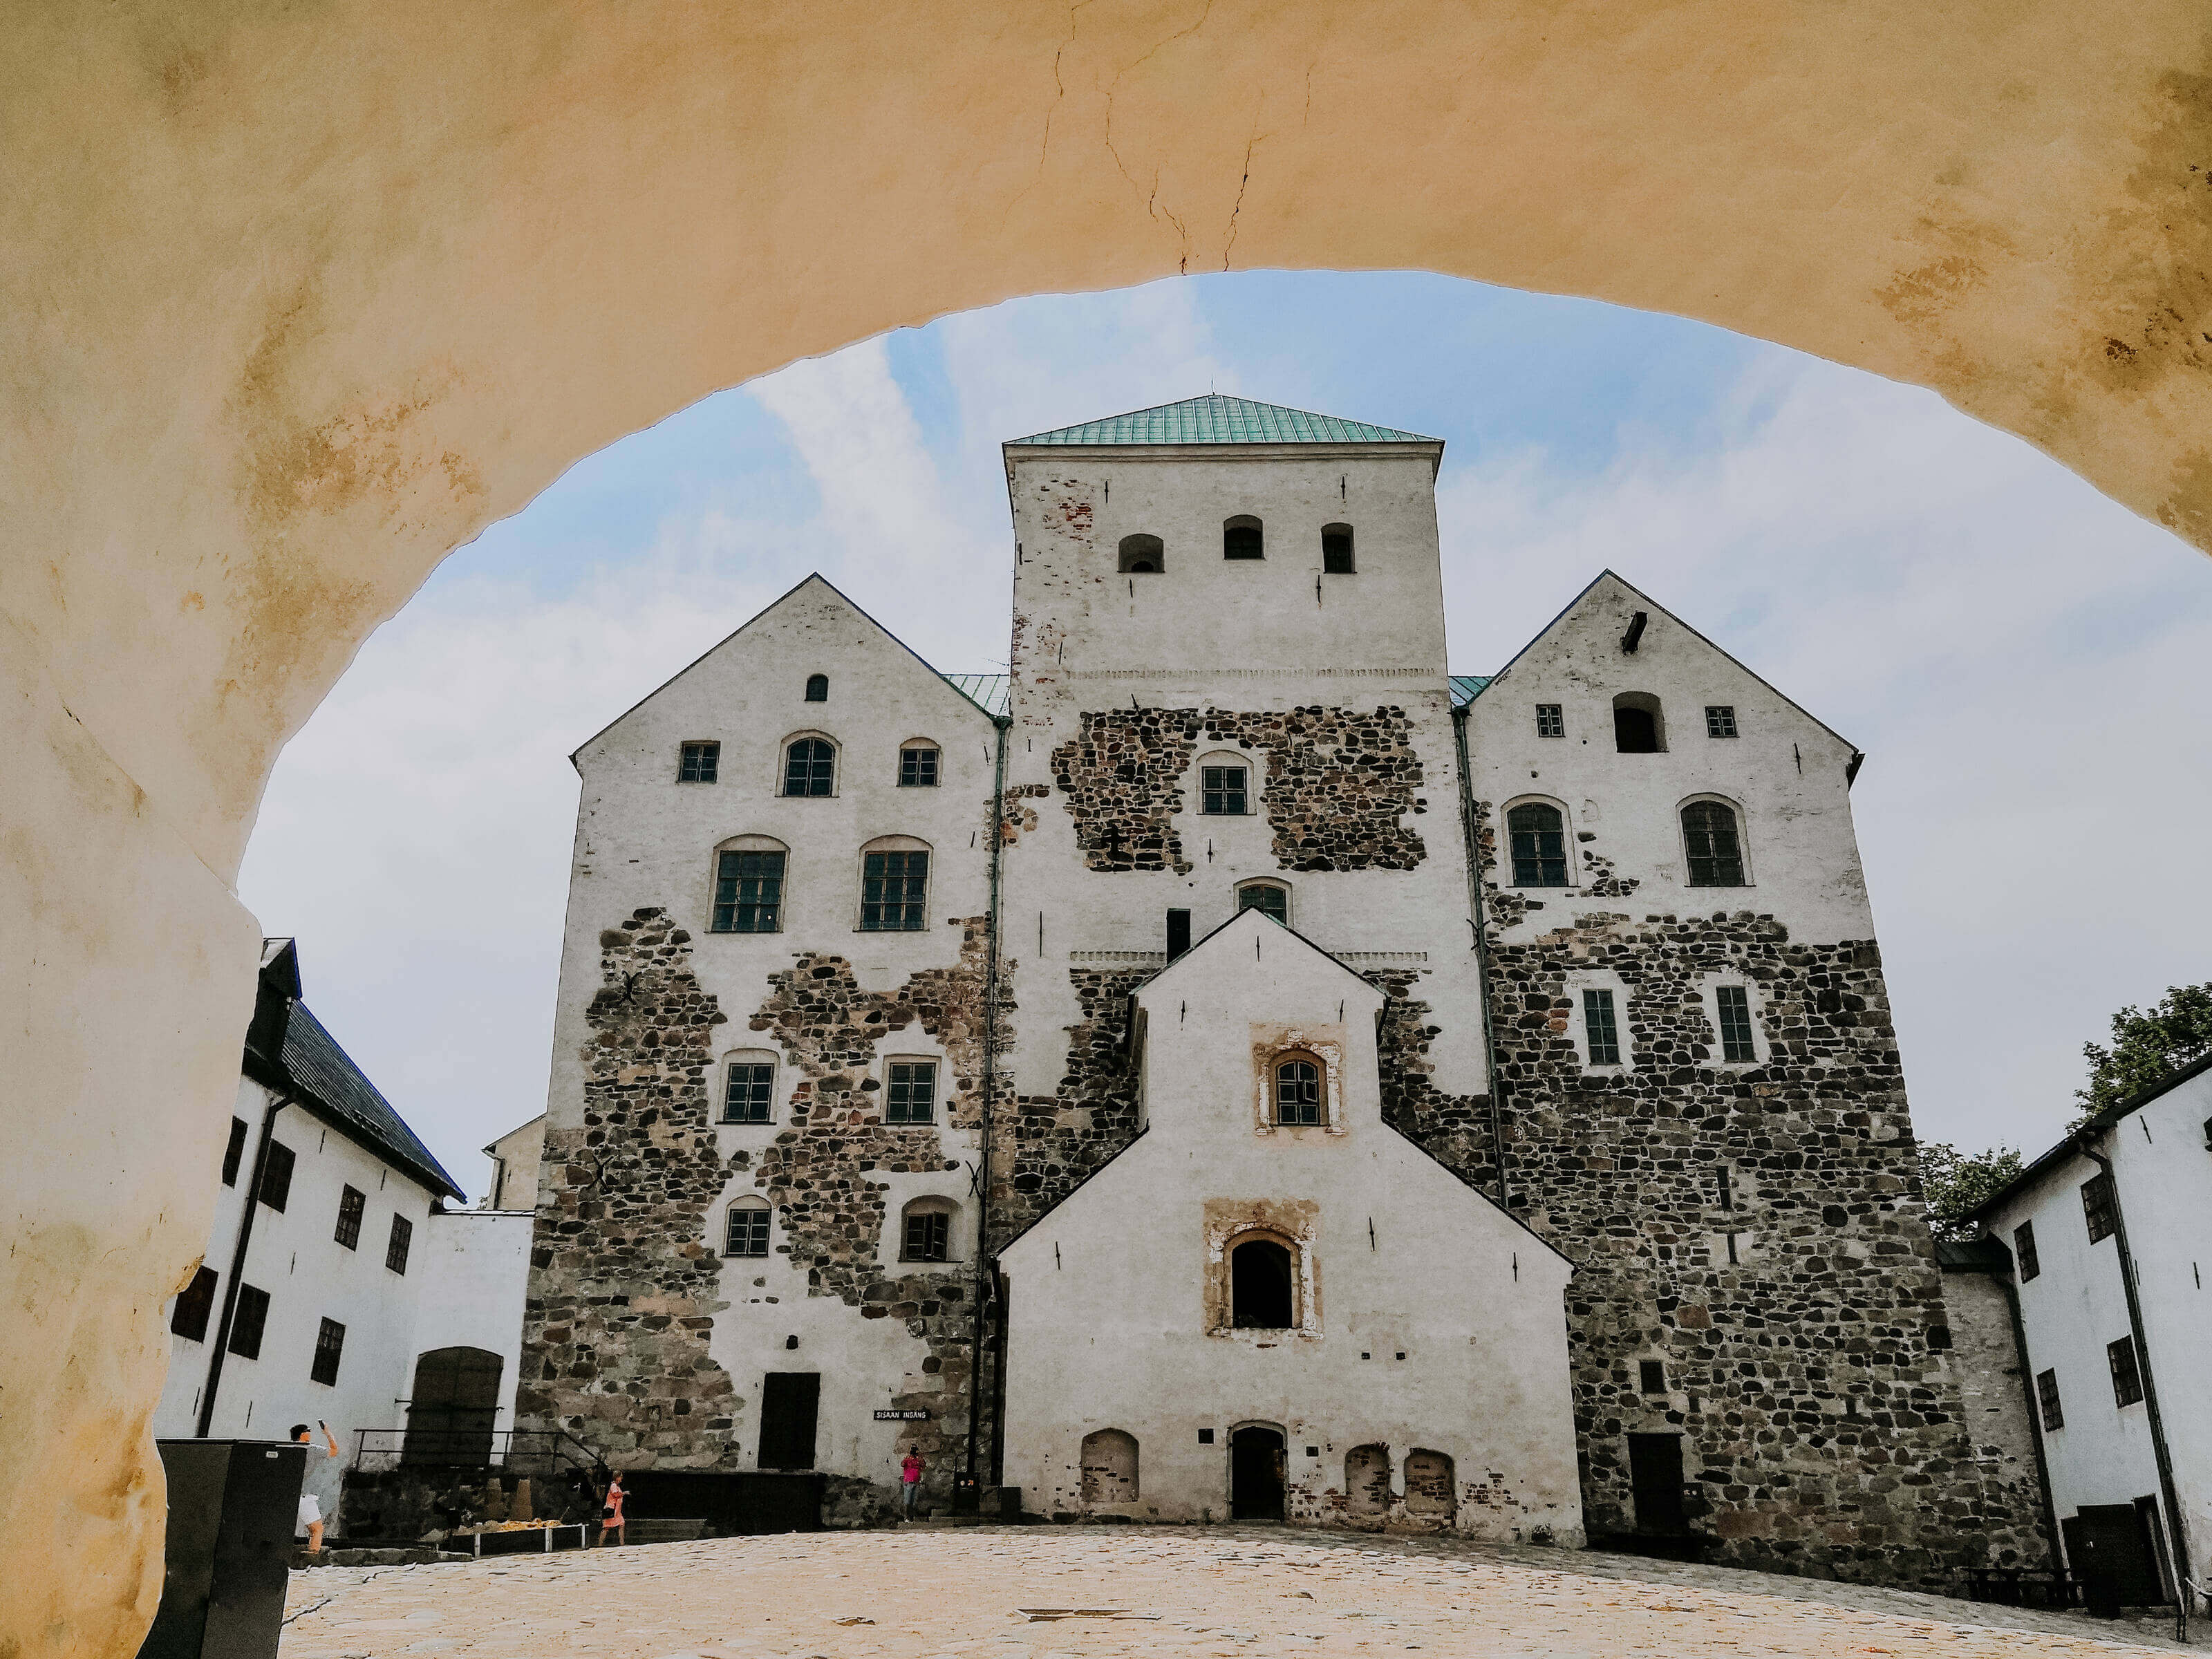 The Turku castle yard during the summer.